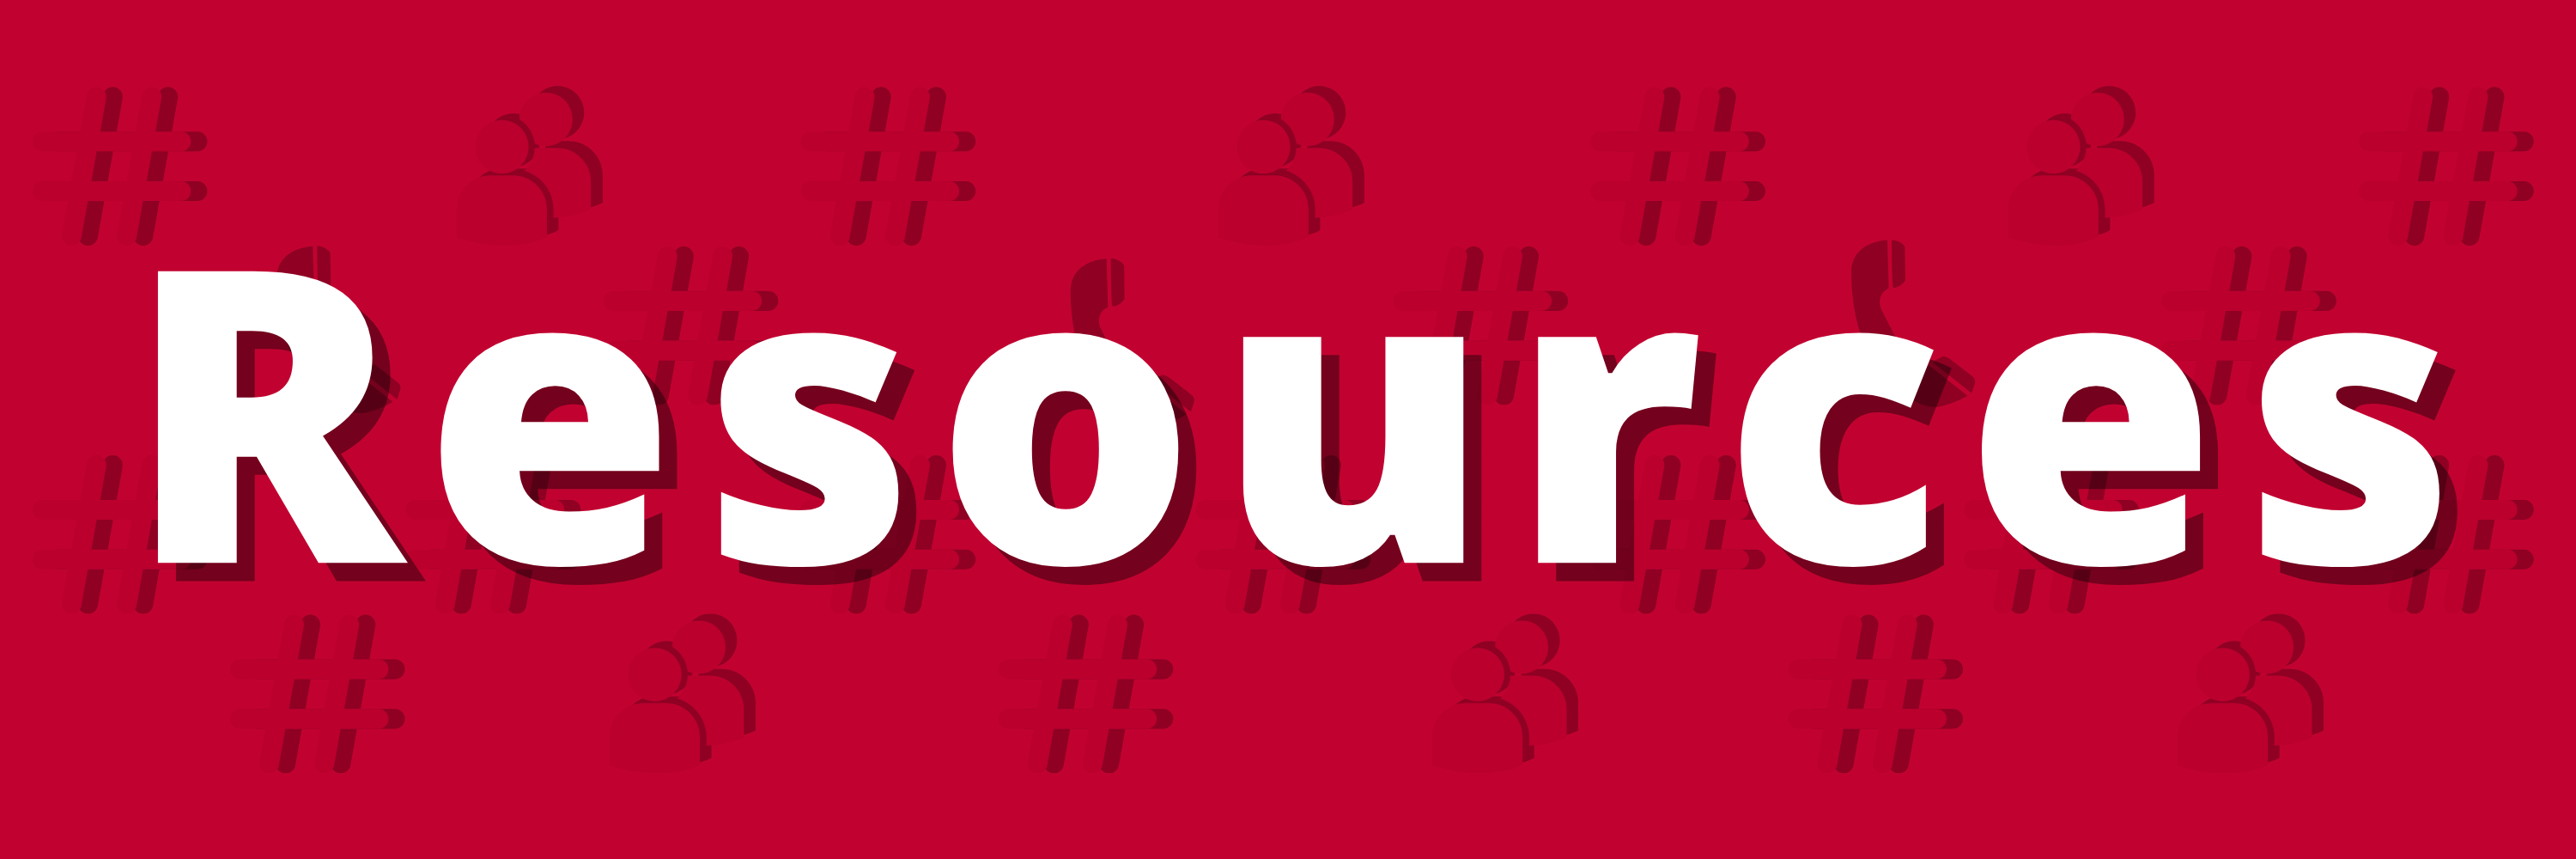 Red resources banner